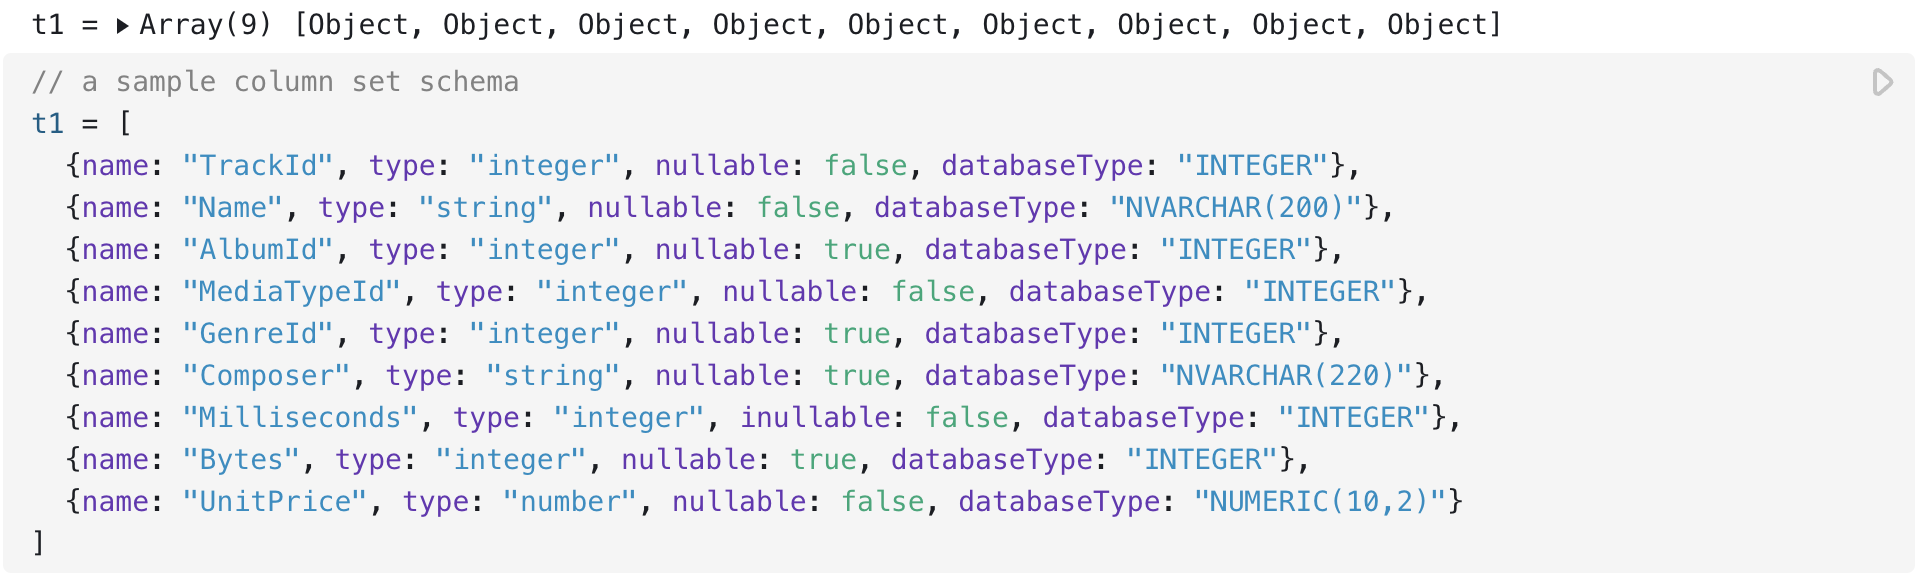 Screen shot of code to create an table as an array of objects where each object contains information about a different column in the table, e.g. {name: 'TrackID', type: 'integer', nullable: false, databaseType: 'INTEGER'}.